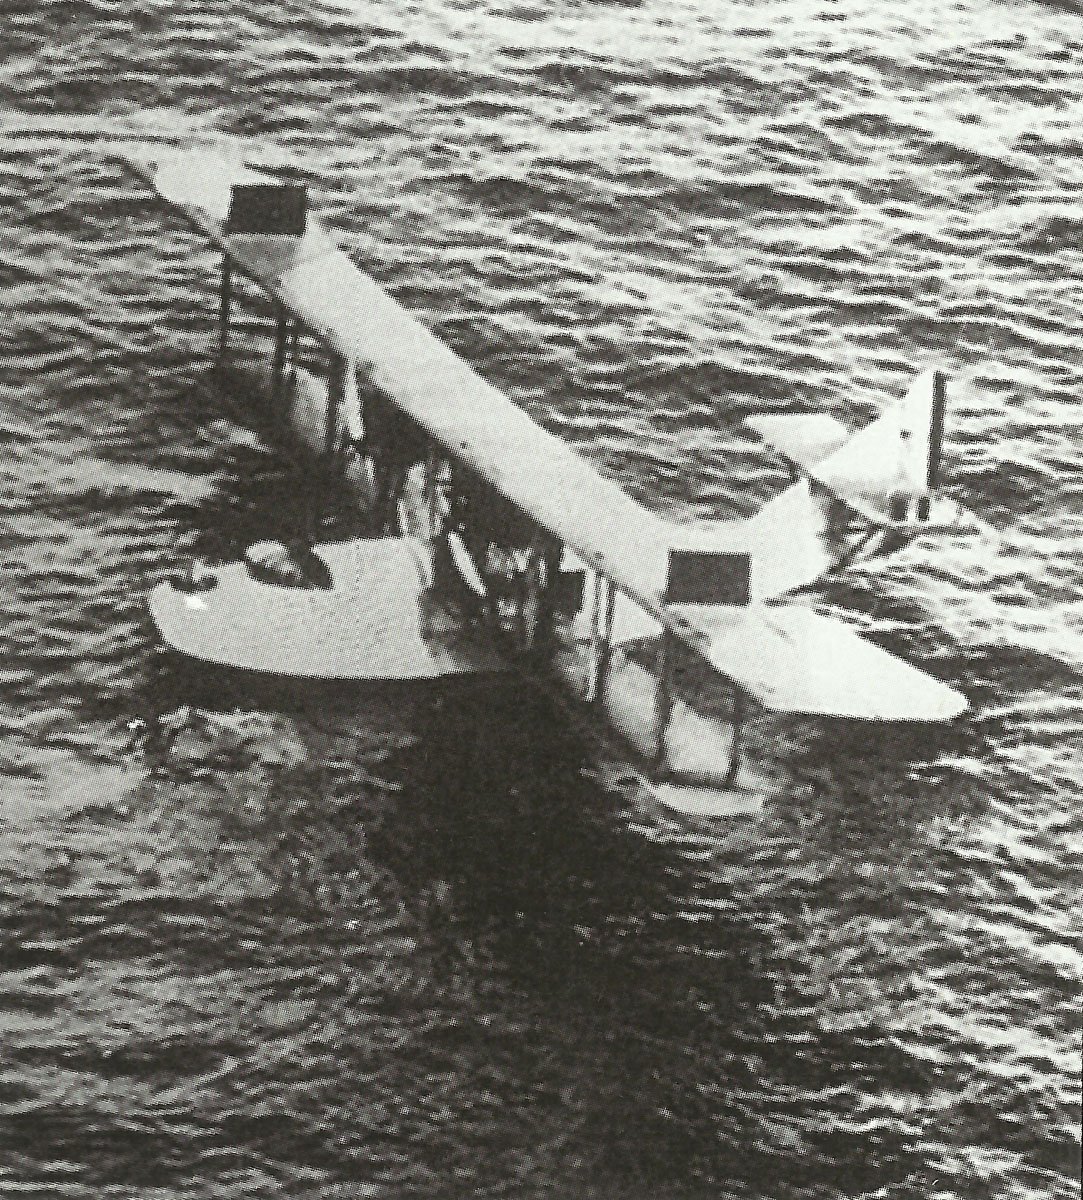 Curtiss H-12 flying boats